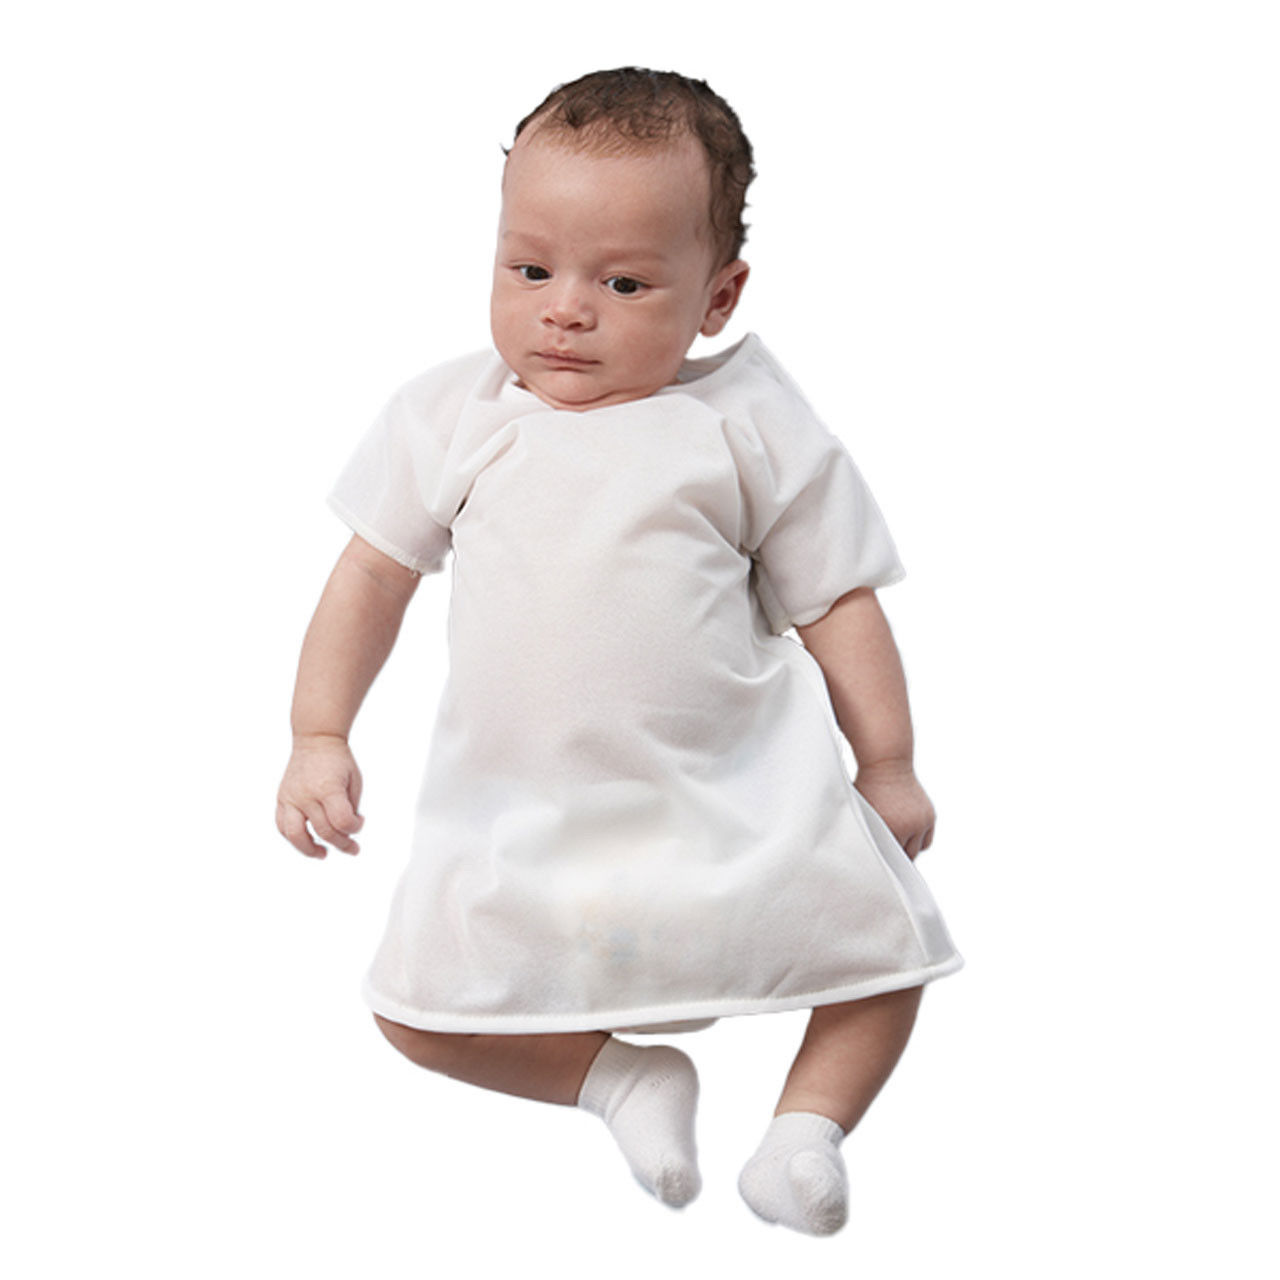 How is the baby hospital gown, specifically the Pediatric Hospital Gowns, White - In Bulk, packaged?